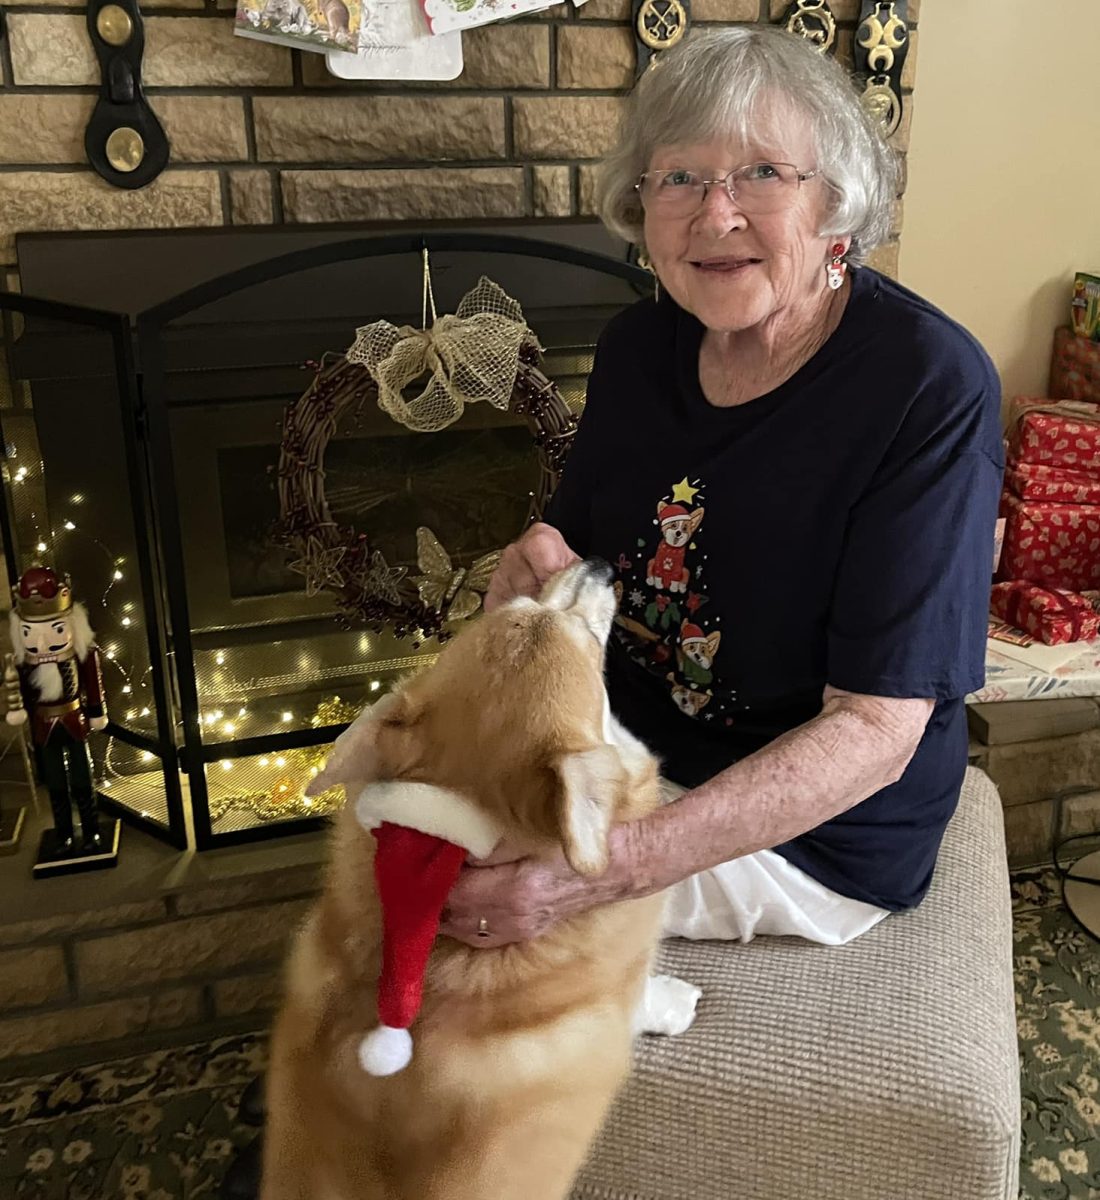 Margaret has lived in Leeton her entire life and now at age 86, enjoys spending most of her time with her beloved corgis.